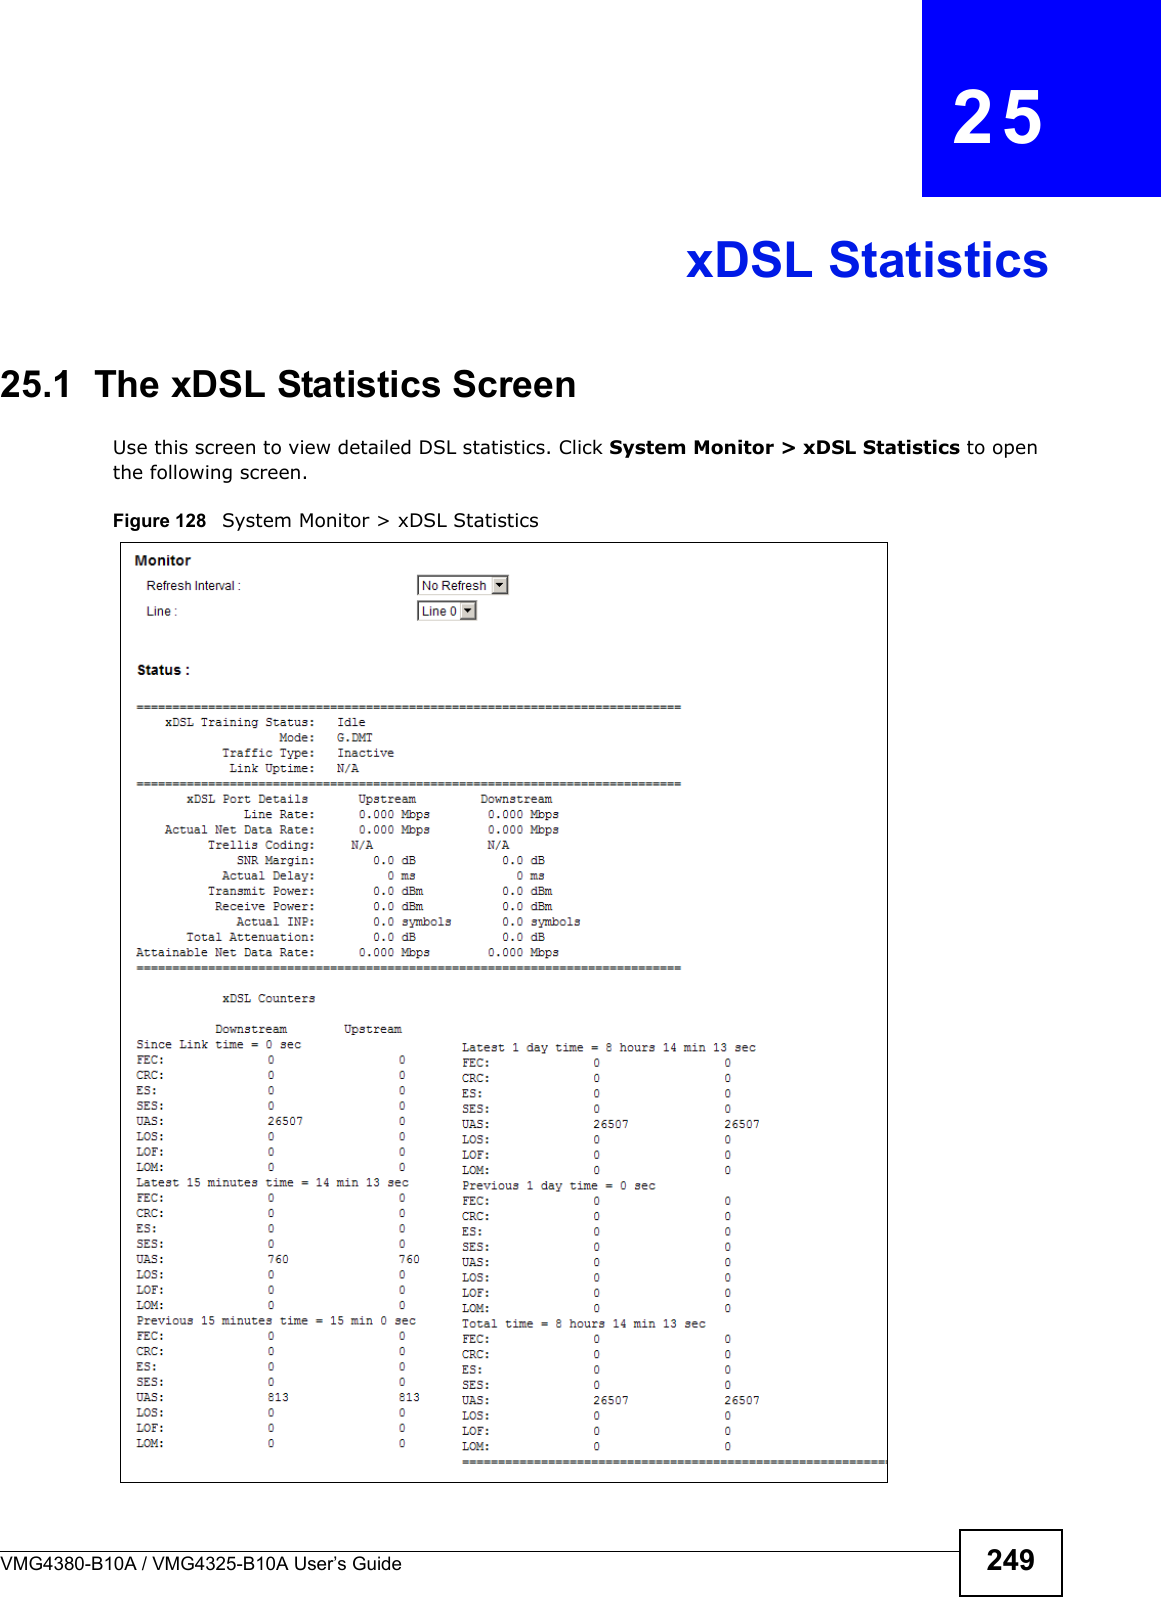 VMG4380-B10A / VMG4325-B10A User’s Guide 249CHAPTER  25xDSL Statistics25.1  The xDSL Statistics ScreenUse this screen to view detailed DSL statistics. Click System Monitor &gt; xDSL Statistics to open the following screen.Figure 128   System Monitor &gt; xDSL Statistics